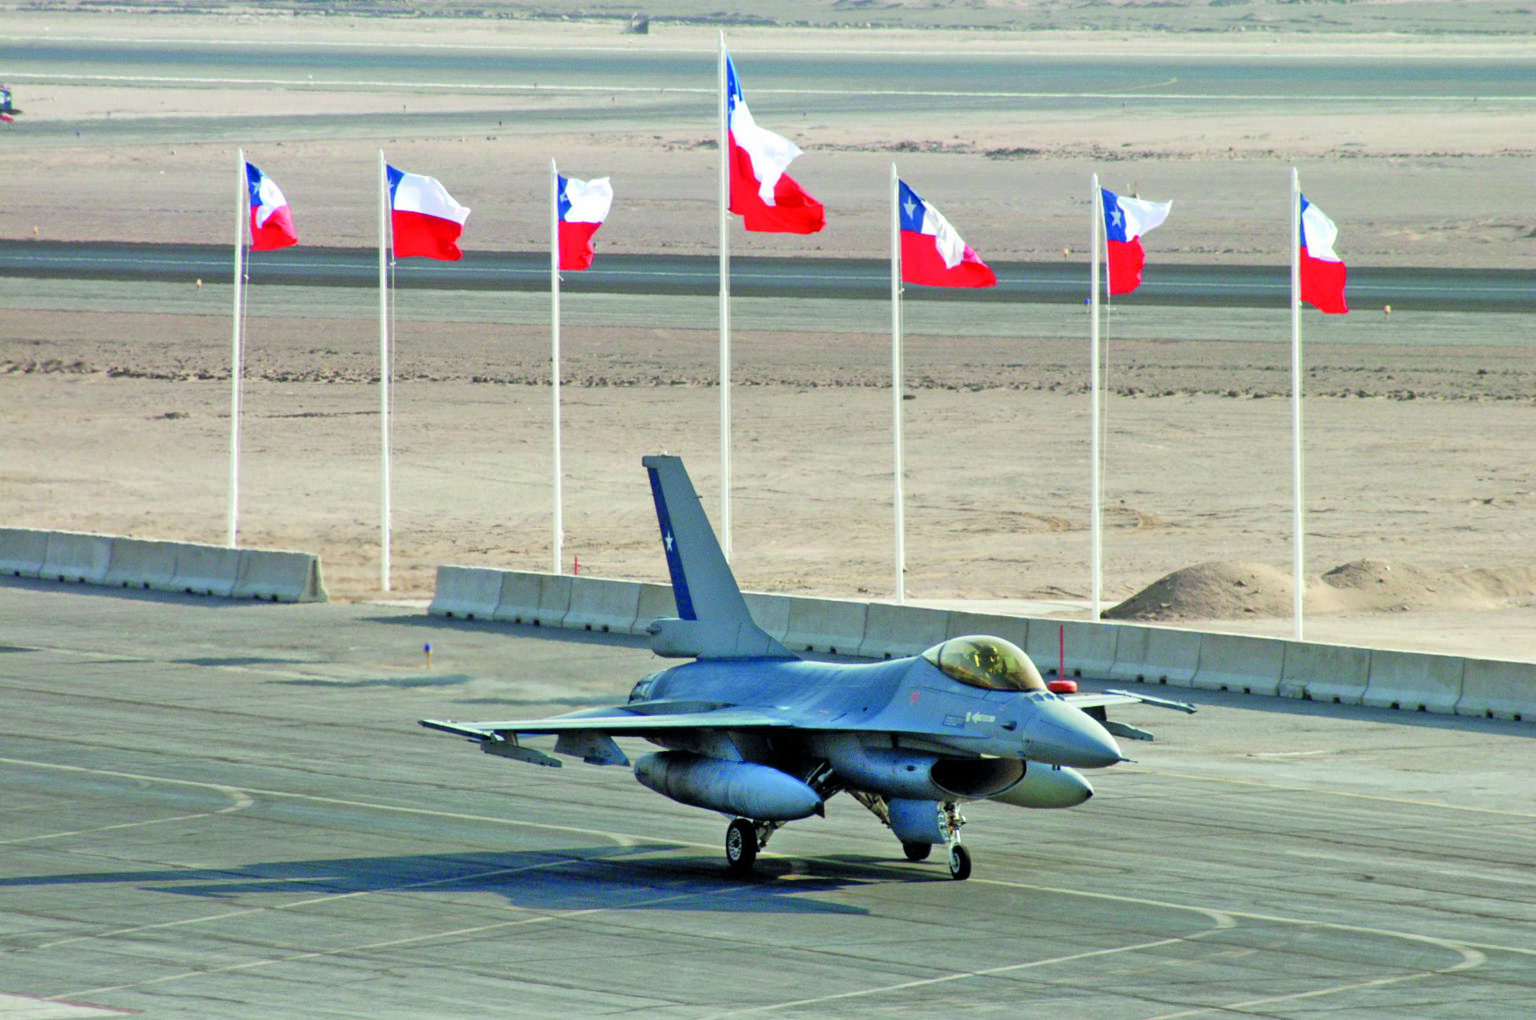 Lockheed Martin Awarded $542 Million Chilean Air Force Contract to Upgrade F-16 Fighter Jets